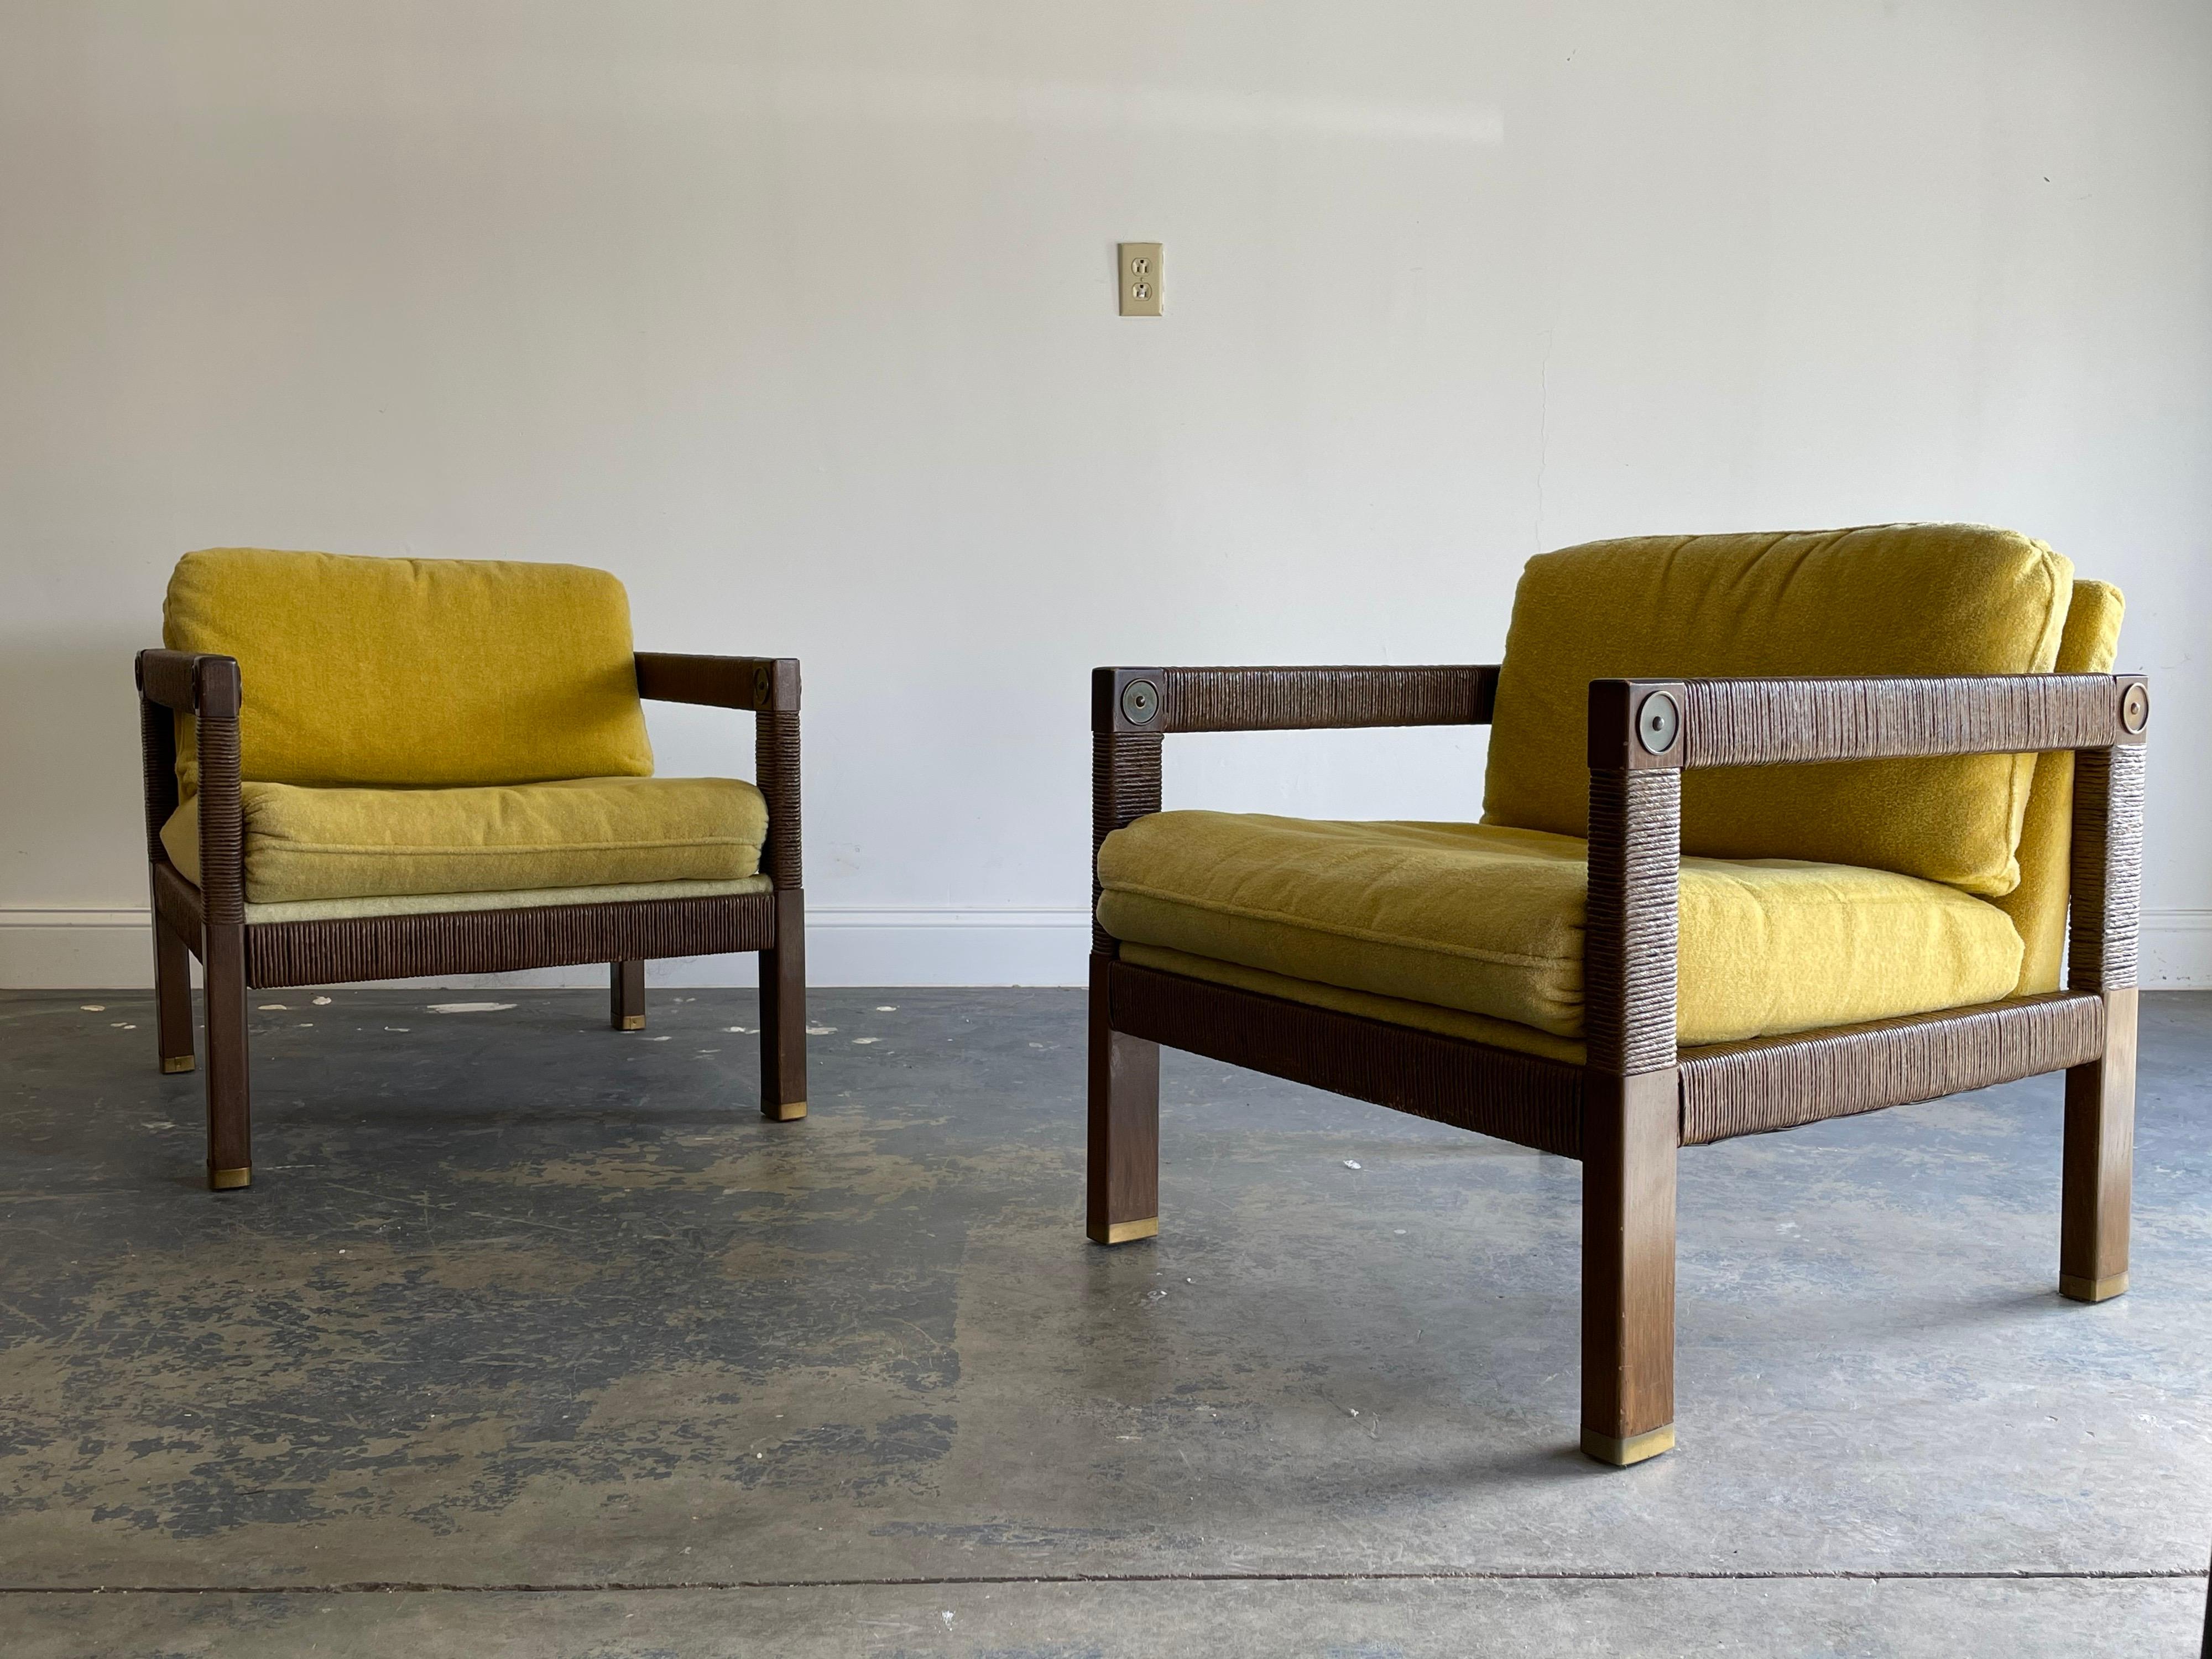 Unusual 1960s modernist club chairs with rush cord wrapped frame. Brass details at the ends of the arms, and brass capped feet. Use of organic materials would help these blend in a variety of interiors. Light and tasteful wear in an appealing nature.